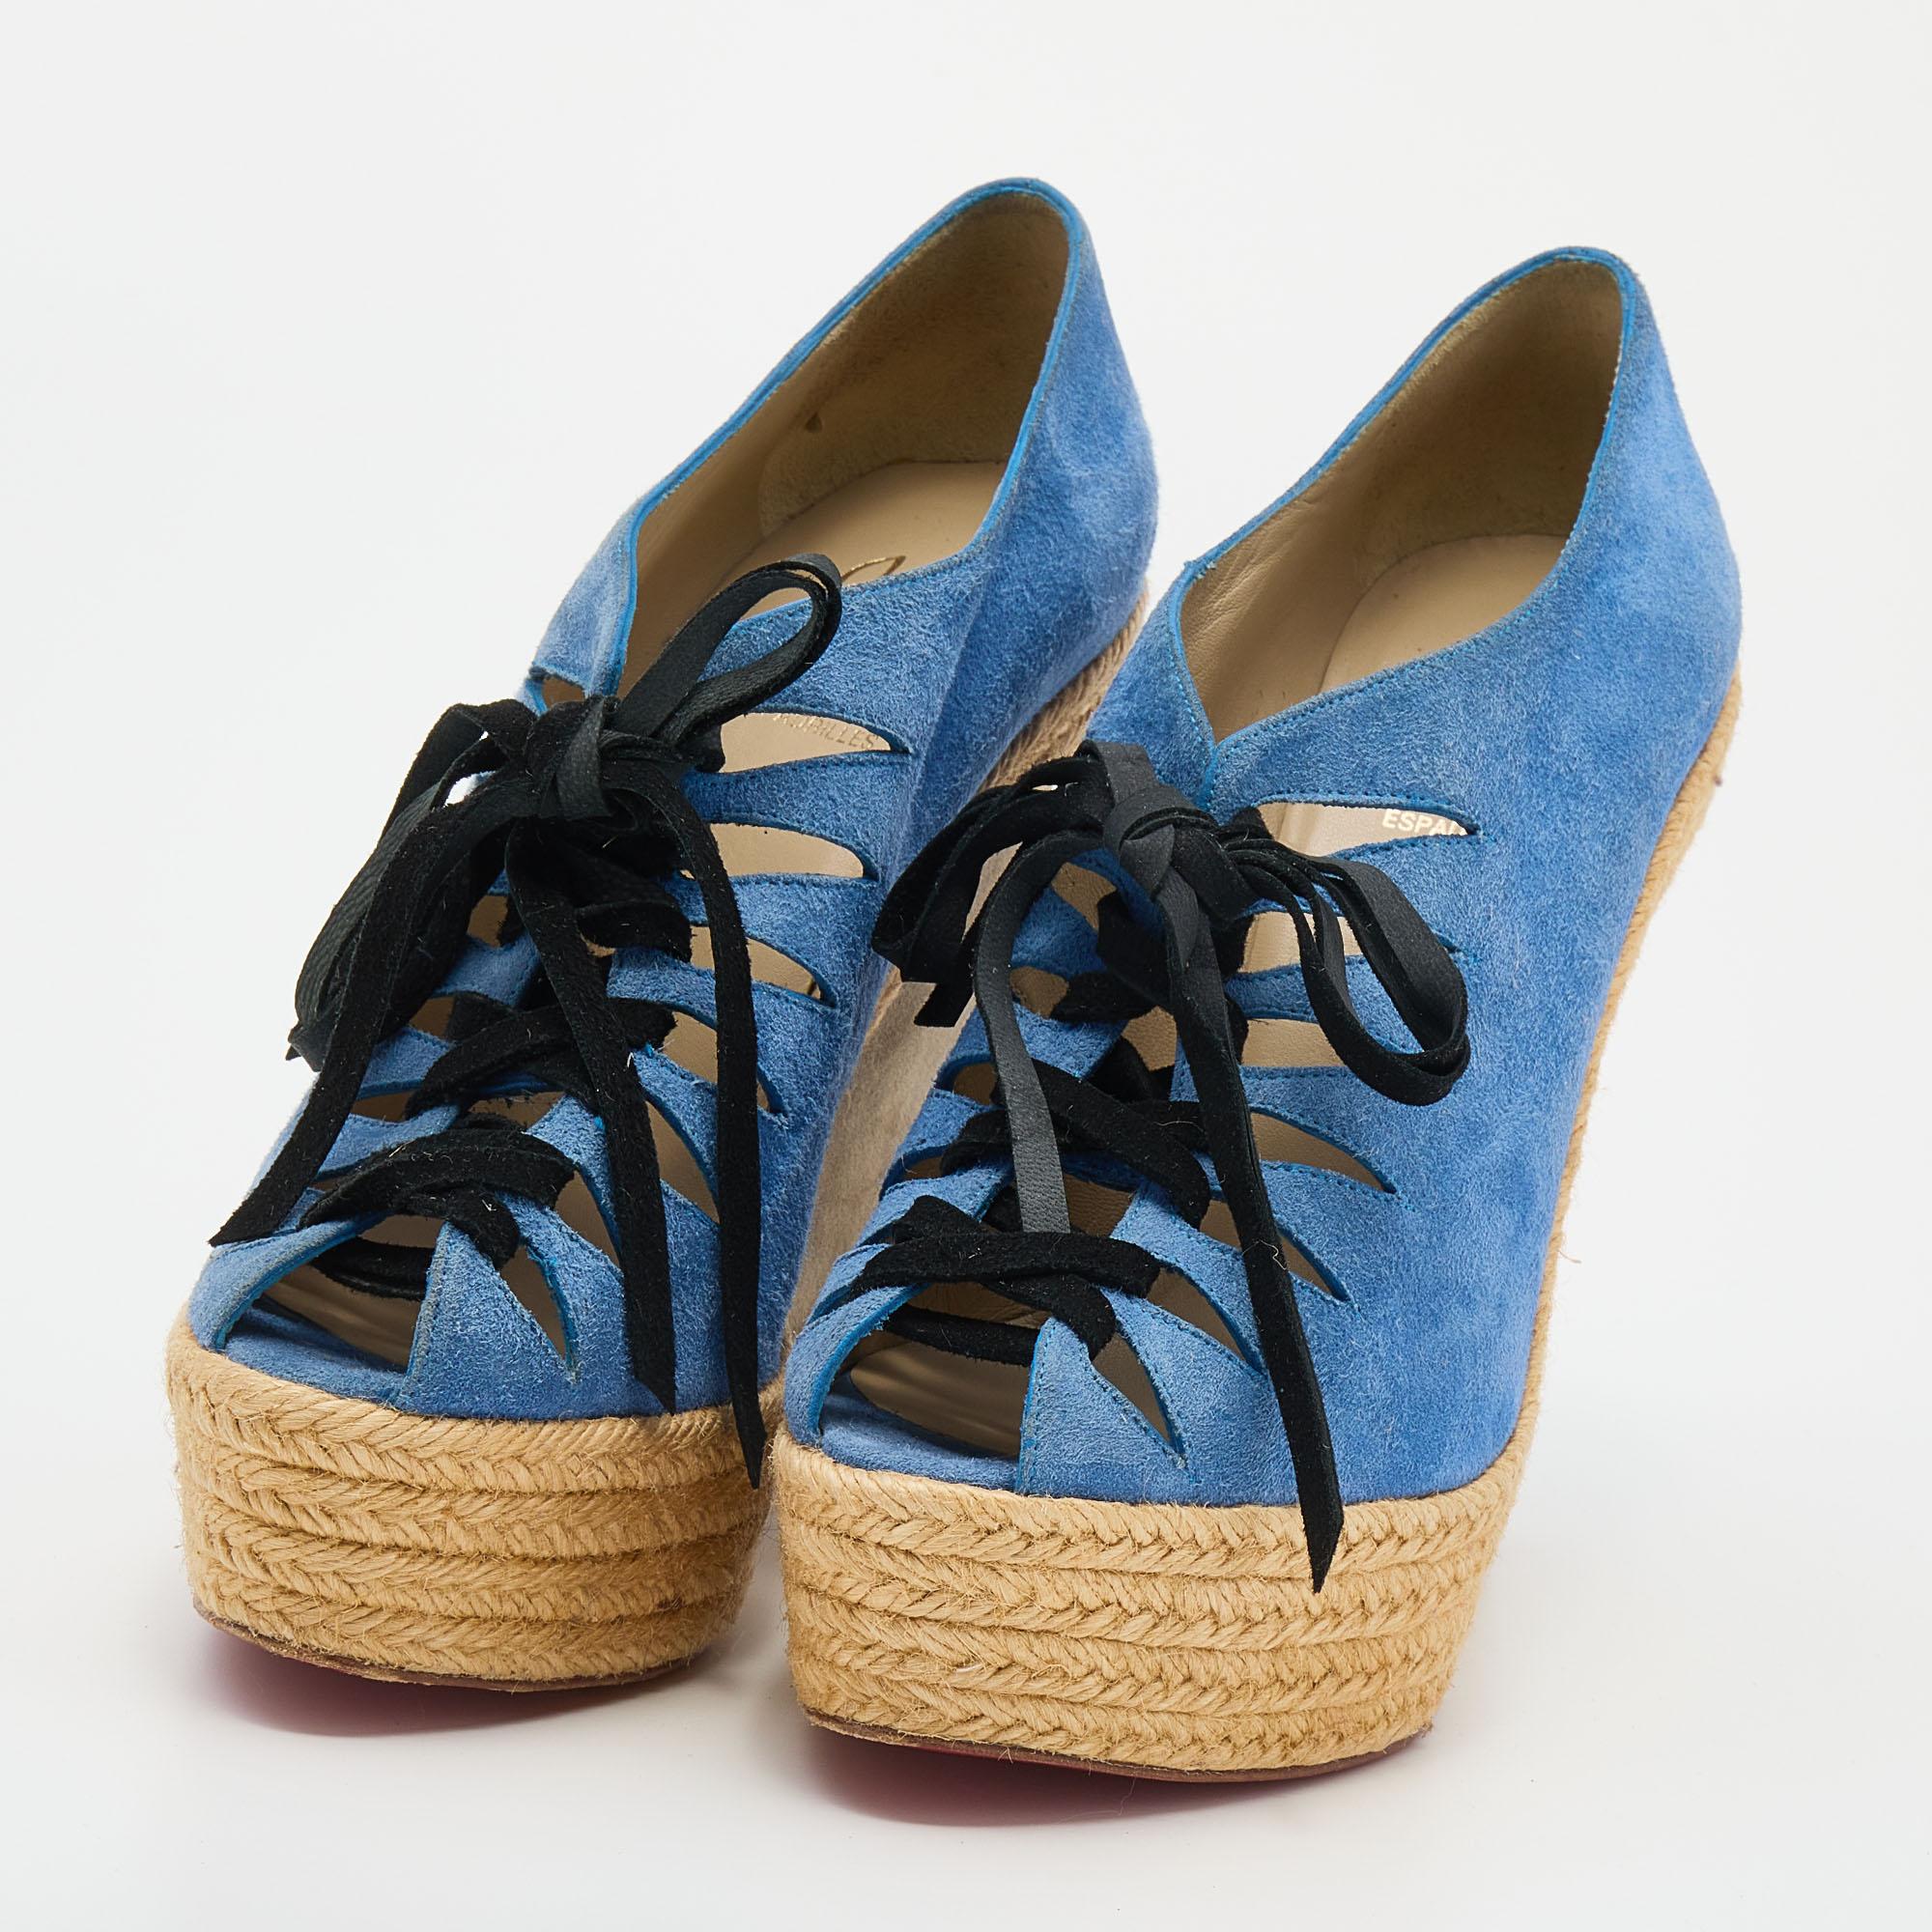 Christian Louboutin Blue/Grey Suede Lace Up Espadrille Wedge Sandals Size 37 In Good Condition For Sale In Dubai, Al Qouz 2